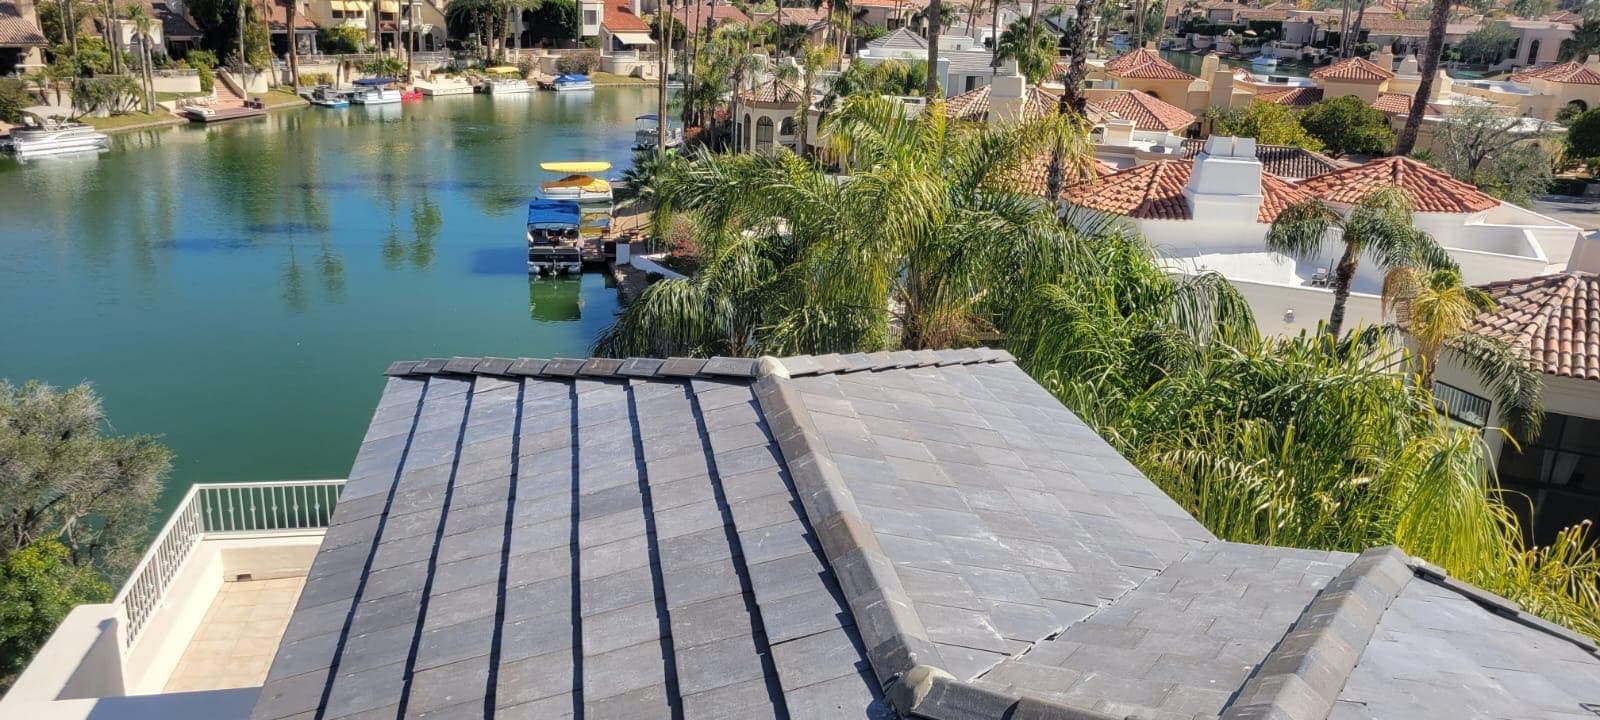 Unique metal tile roofing options available in Ironwood Village by Behmer.